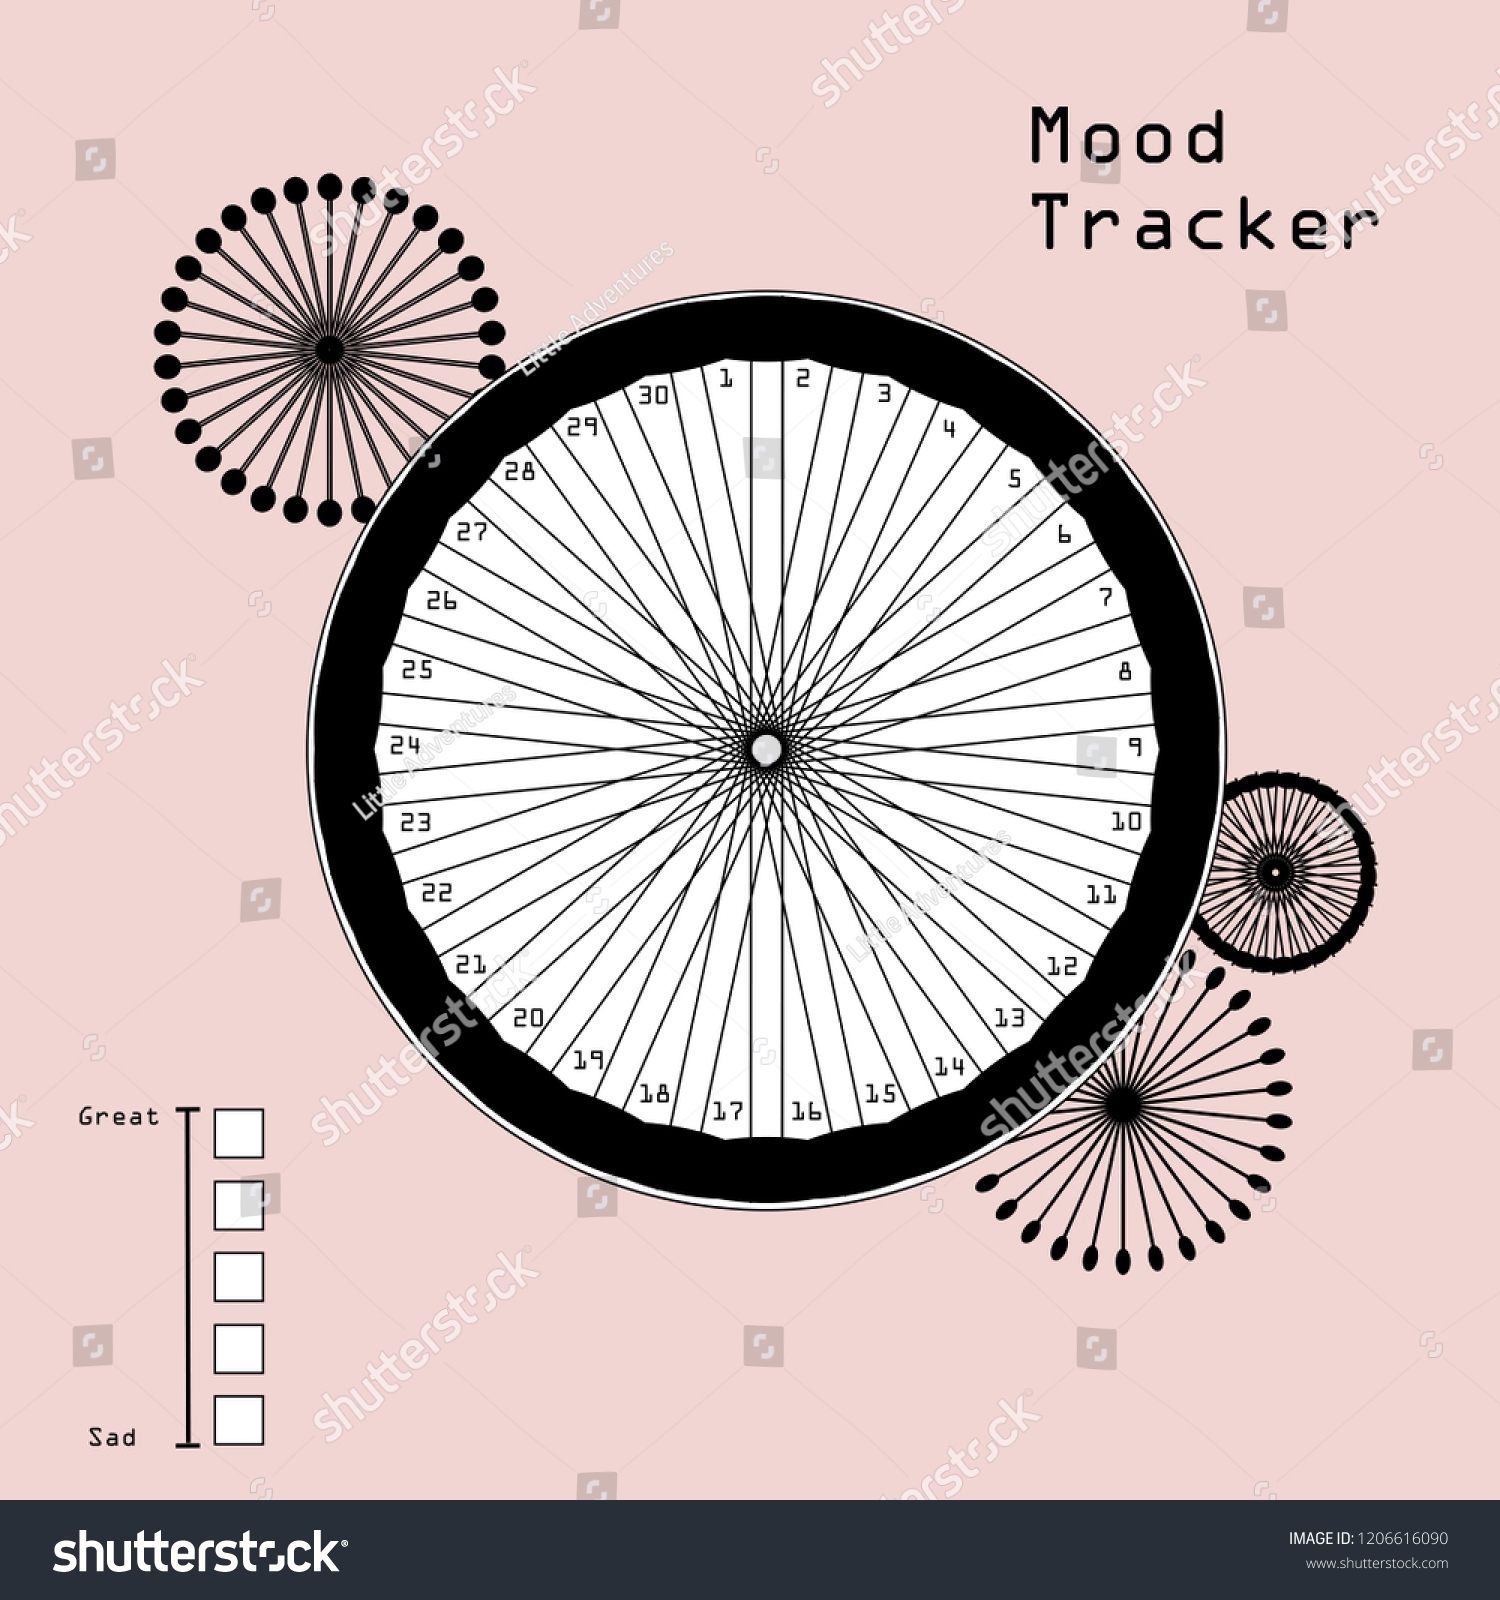 Mood Tracker 30 Days Calendar Month Stock Vector (Royalty Free within Blank 30 Day Month Calendar